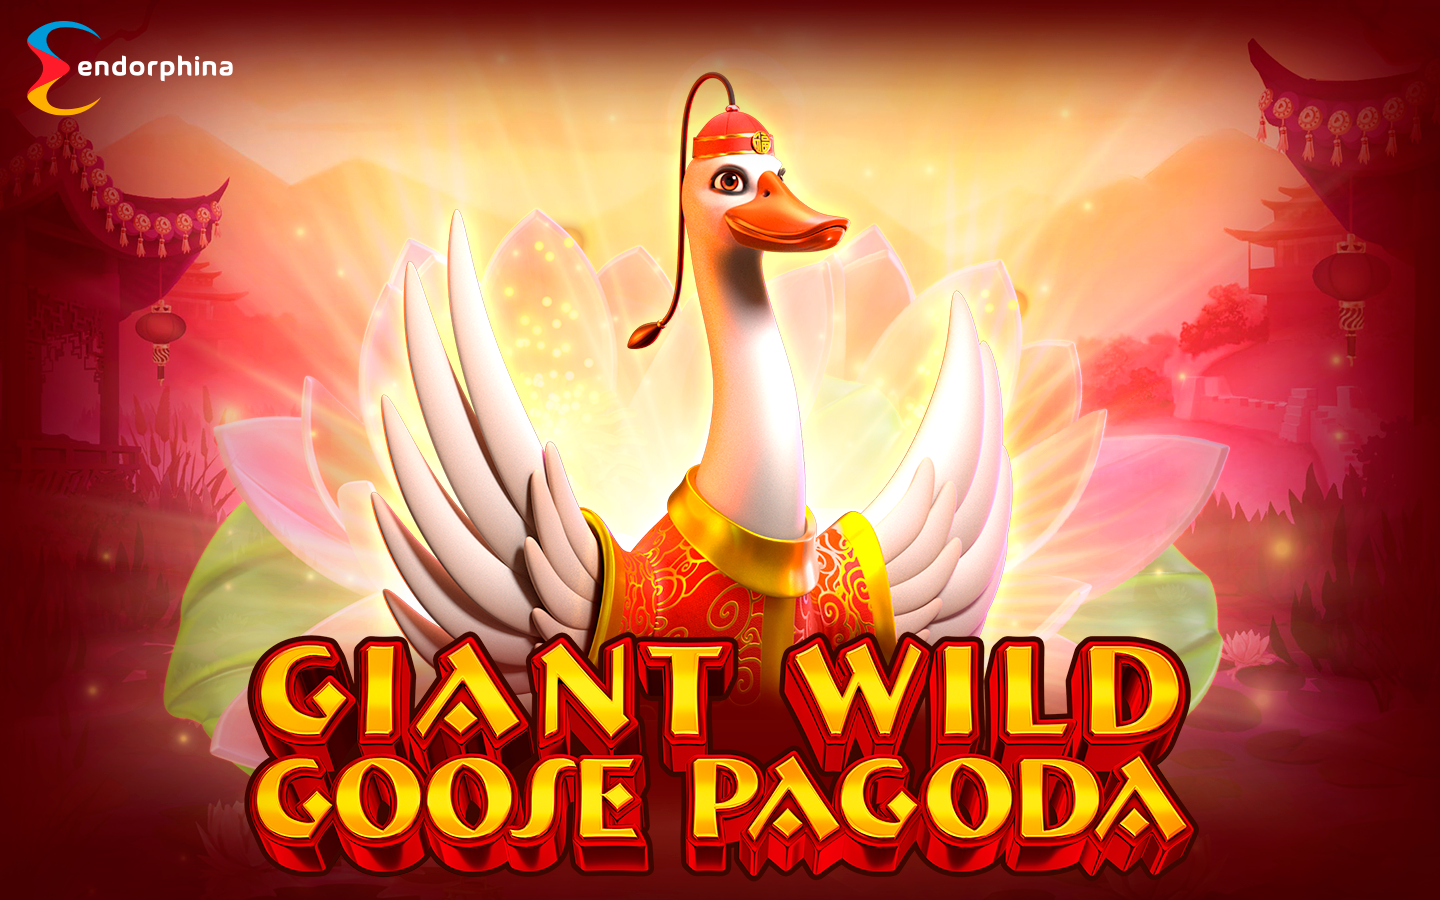 NEW SLOT GAME IS OUT NOW! | Giant Wild Goose Pagoda